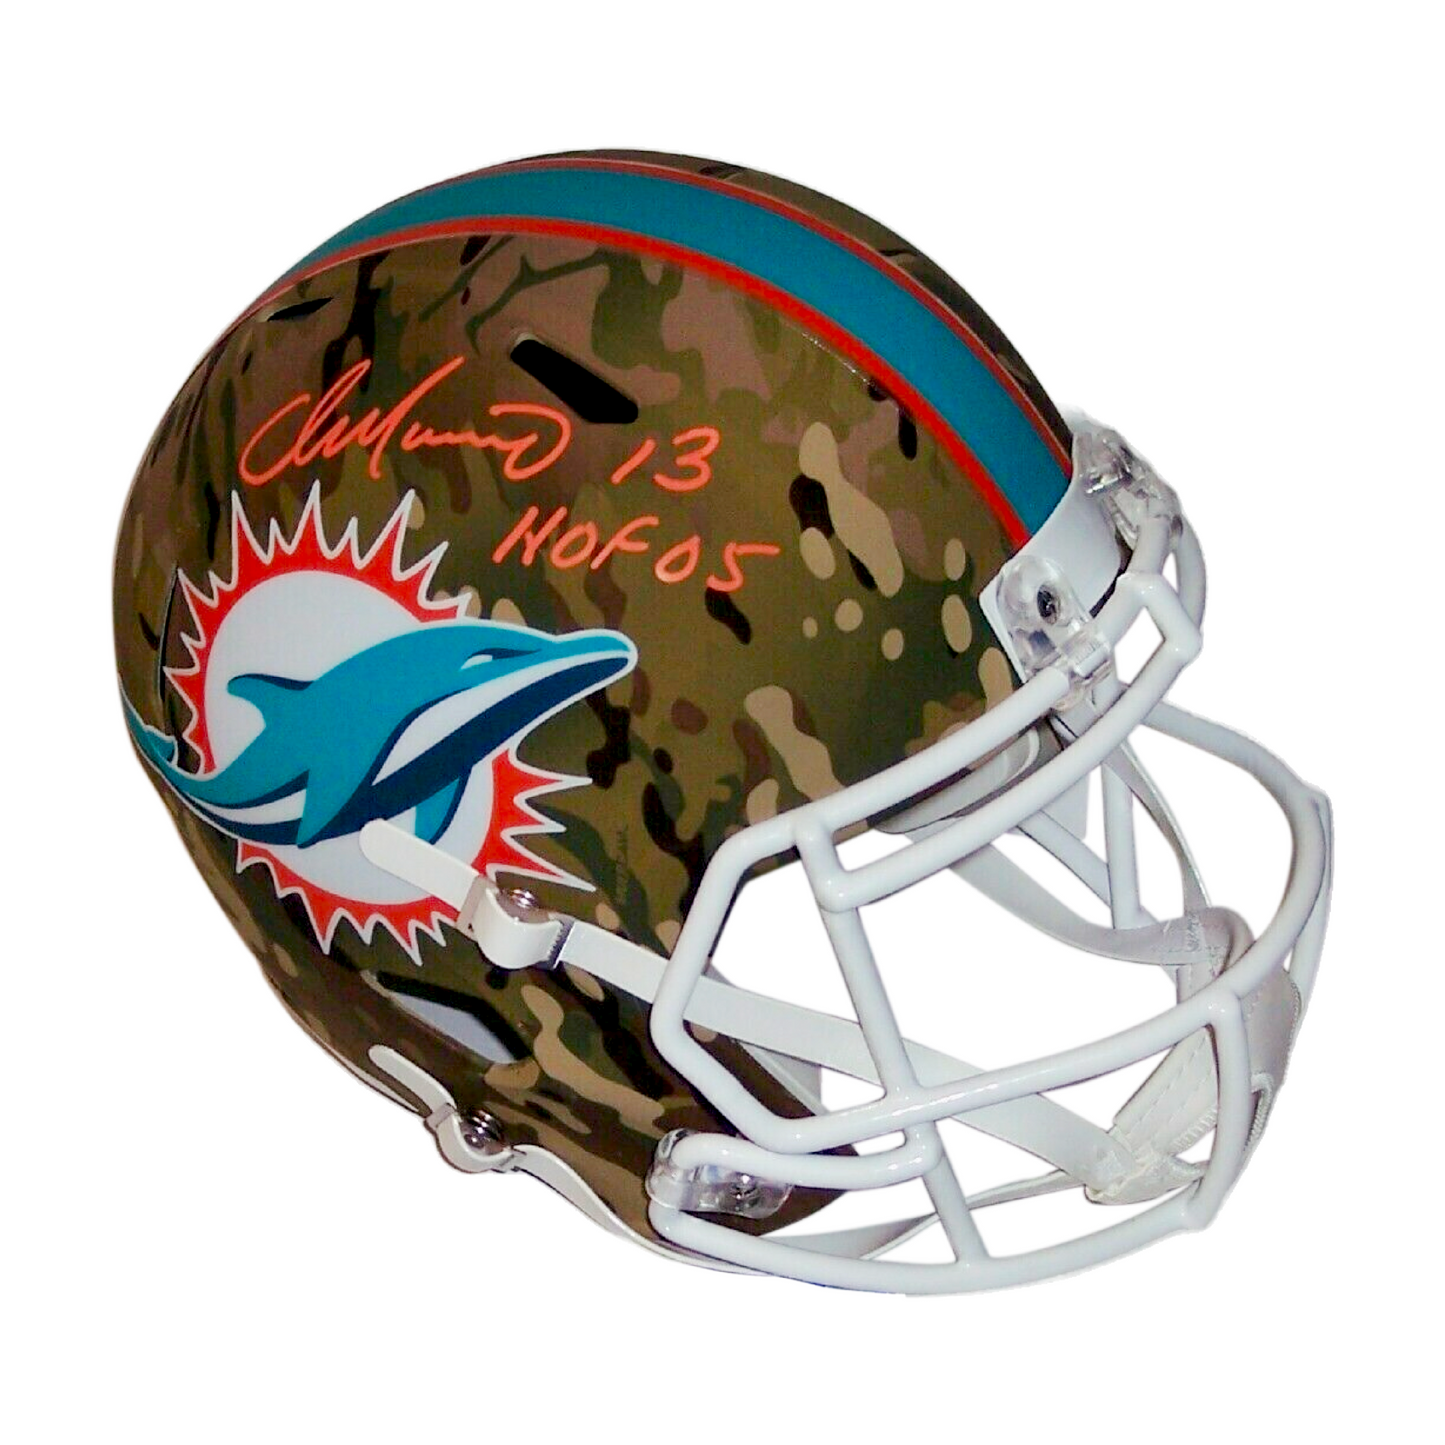 Dan Marino Autographed Hand Signed Miami Dolphins Riddell Speed Camo Full-Size Replica Football Helmet with HOF Inscription - BAS